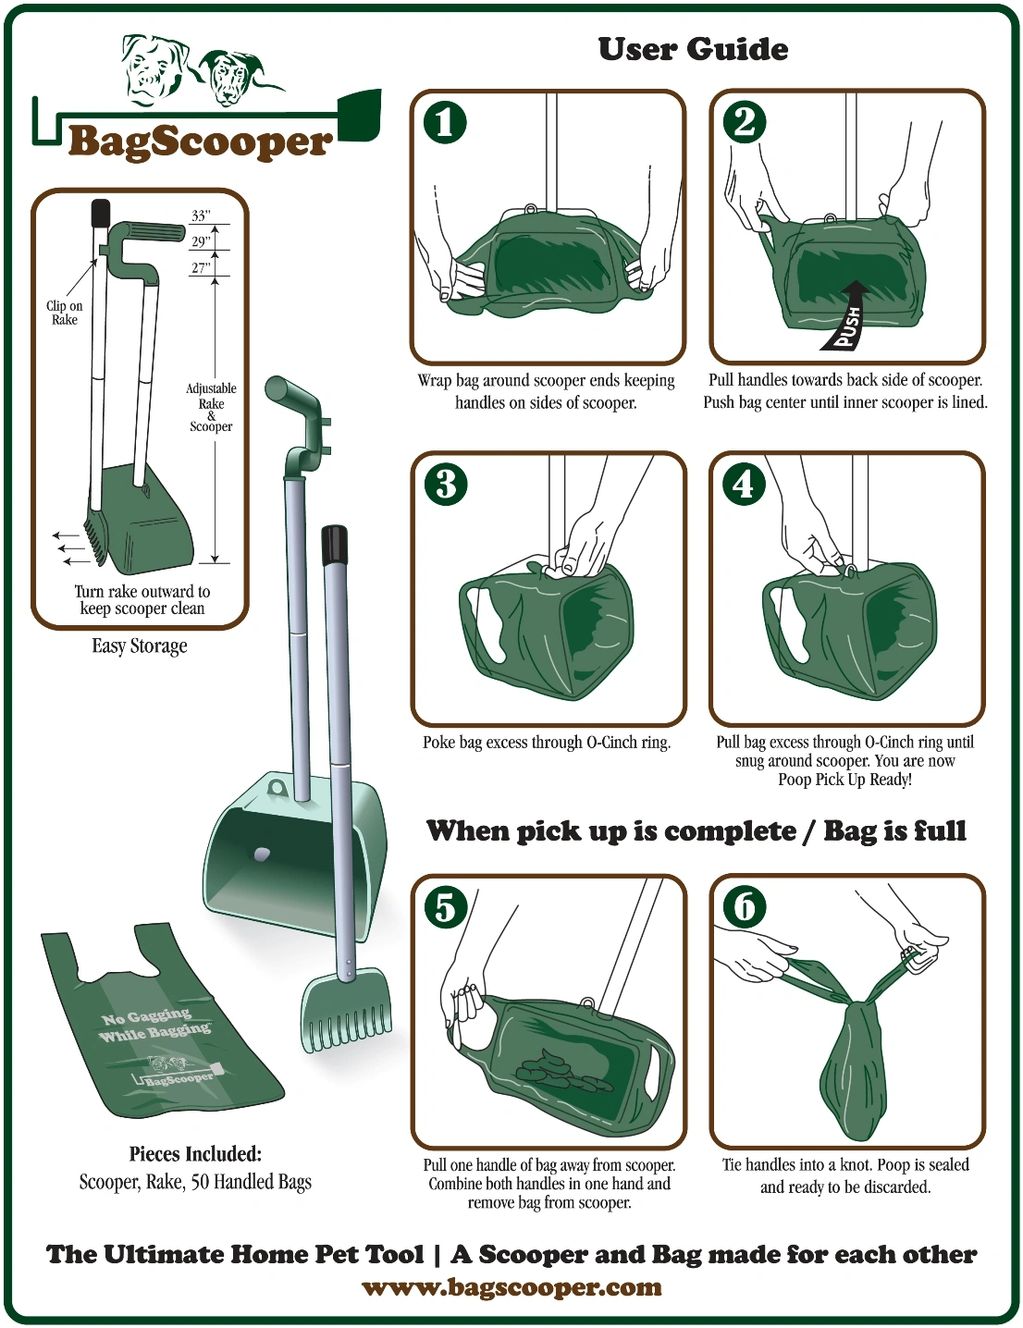 Instructions on how to apply plastic waste bag to Pooper Scooper bucket.